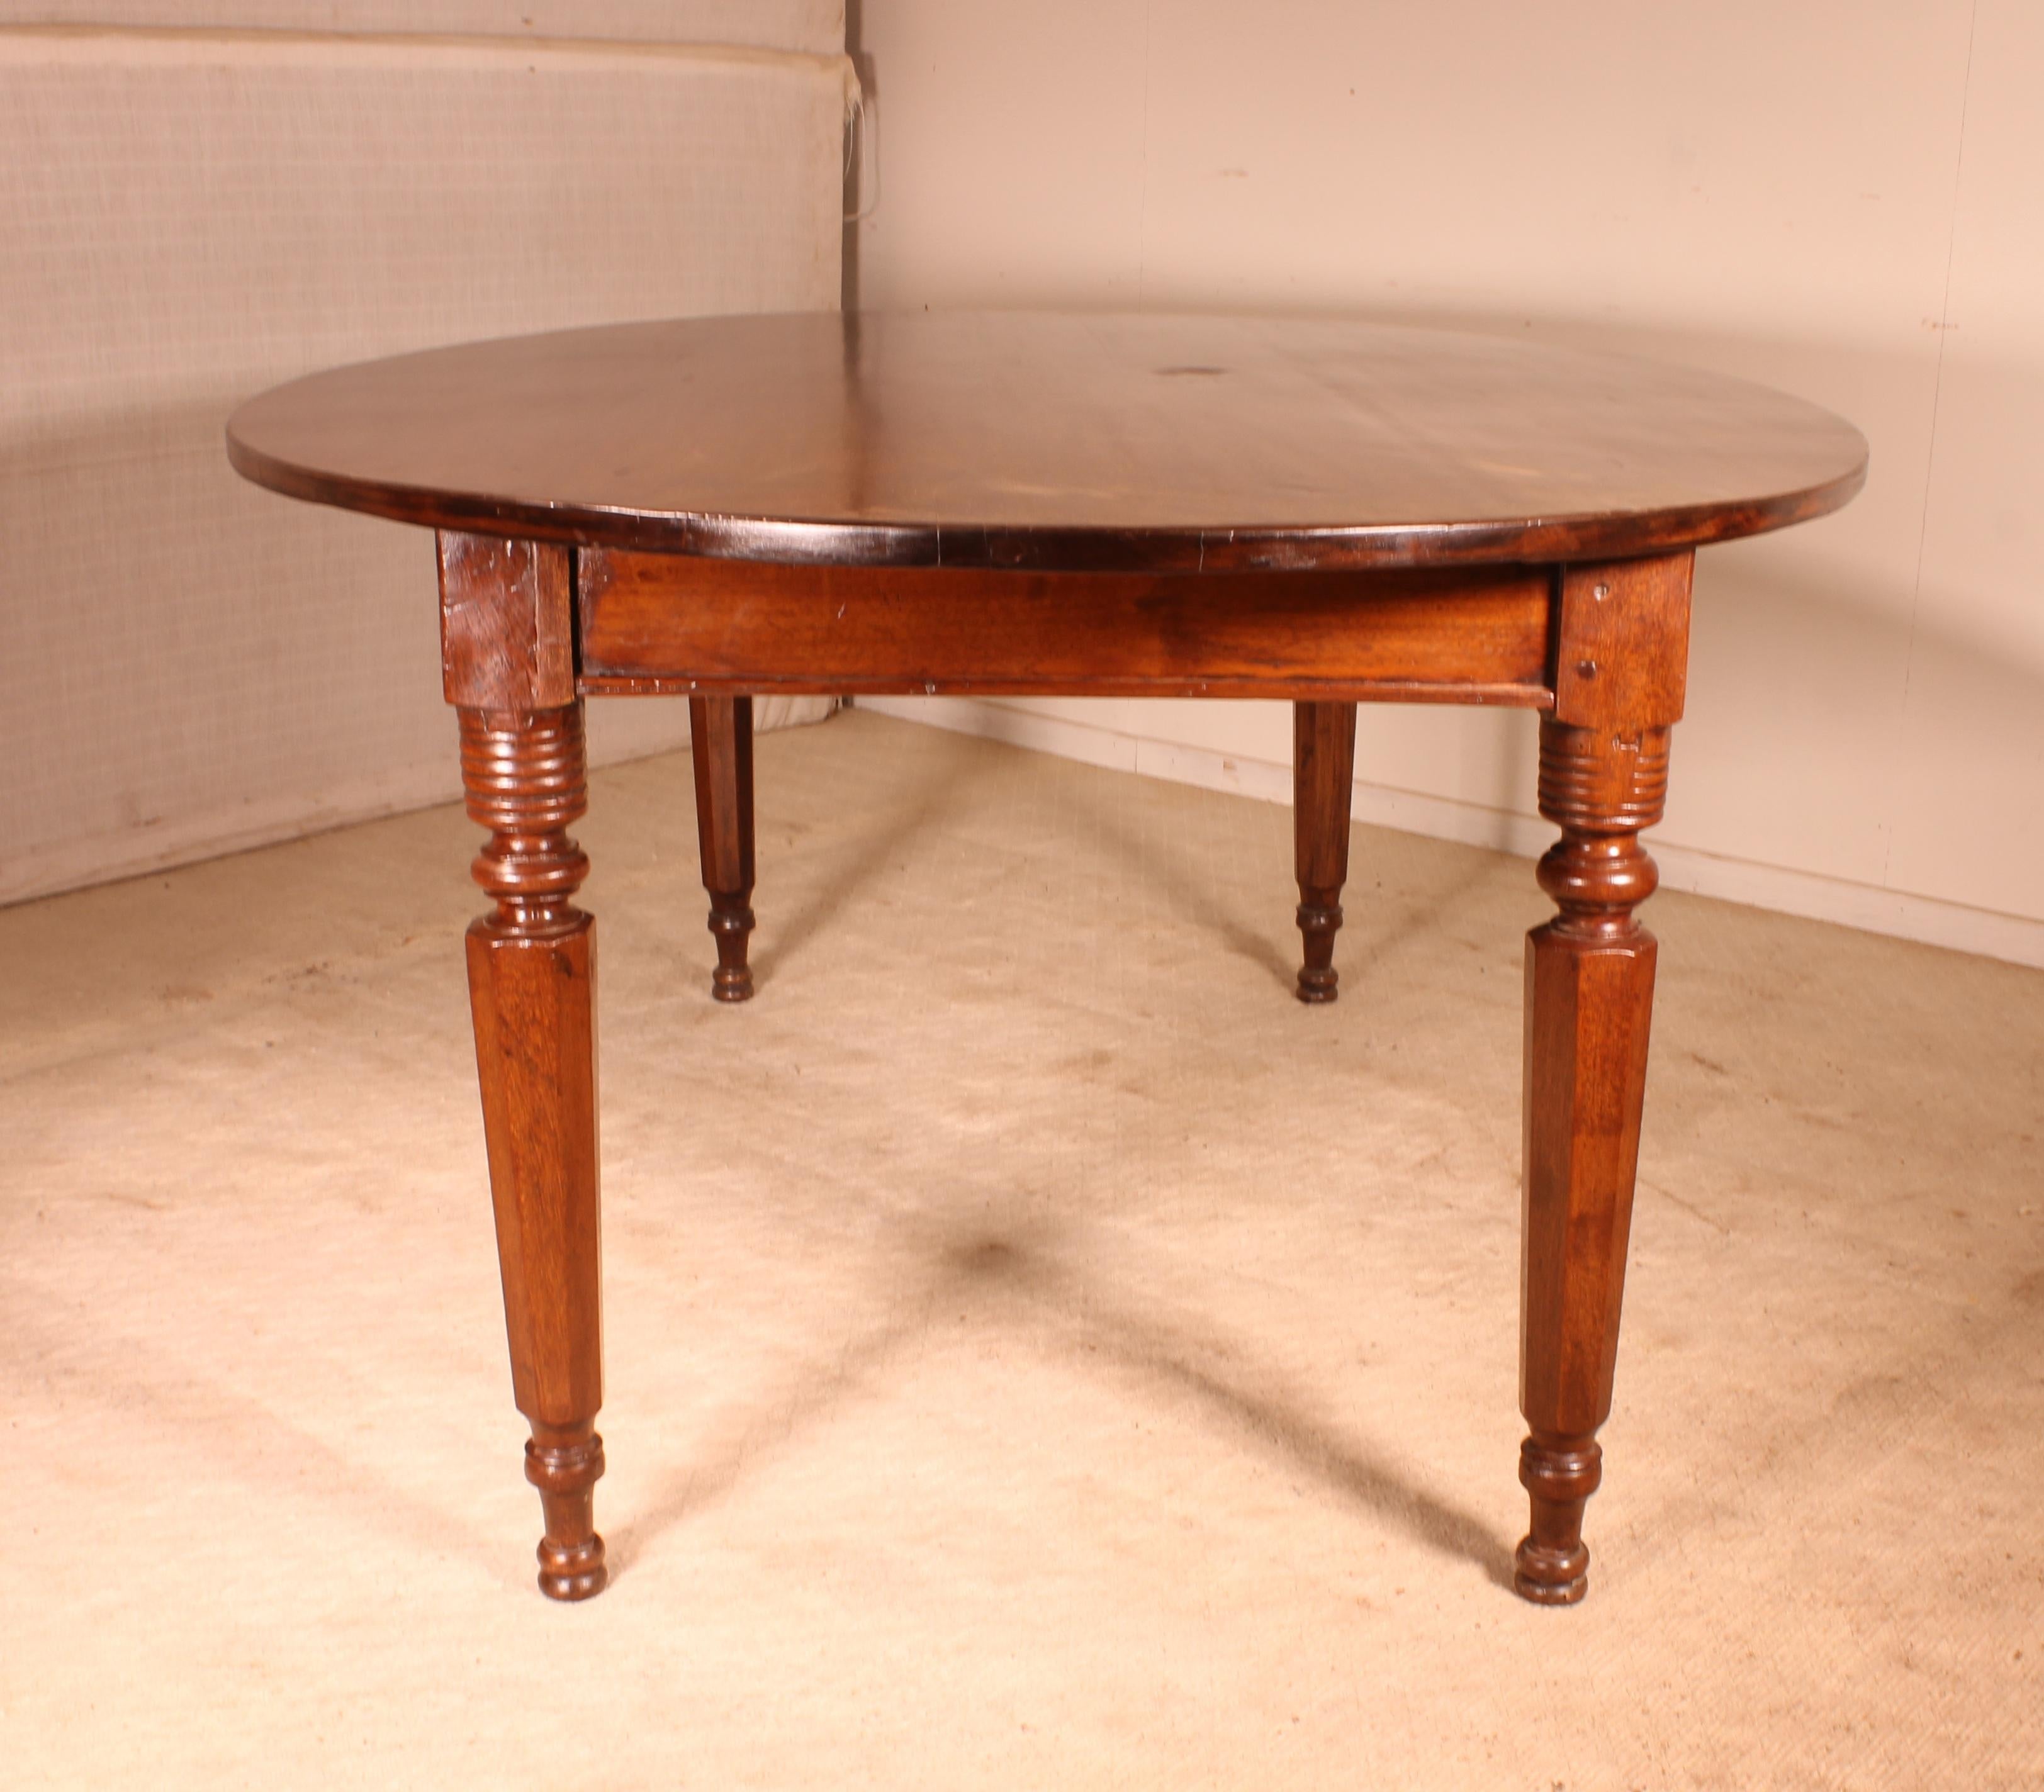 Wood Refectory Table Ellipse Shaped, 19th Century